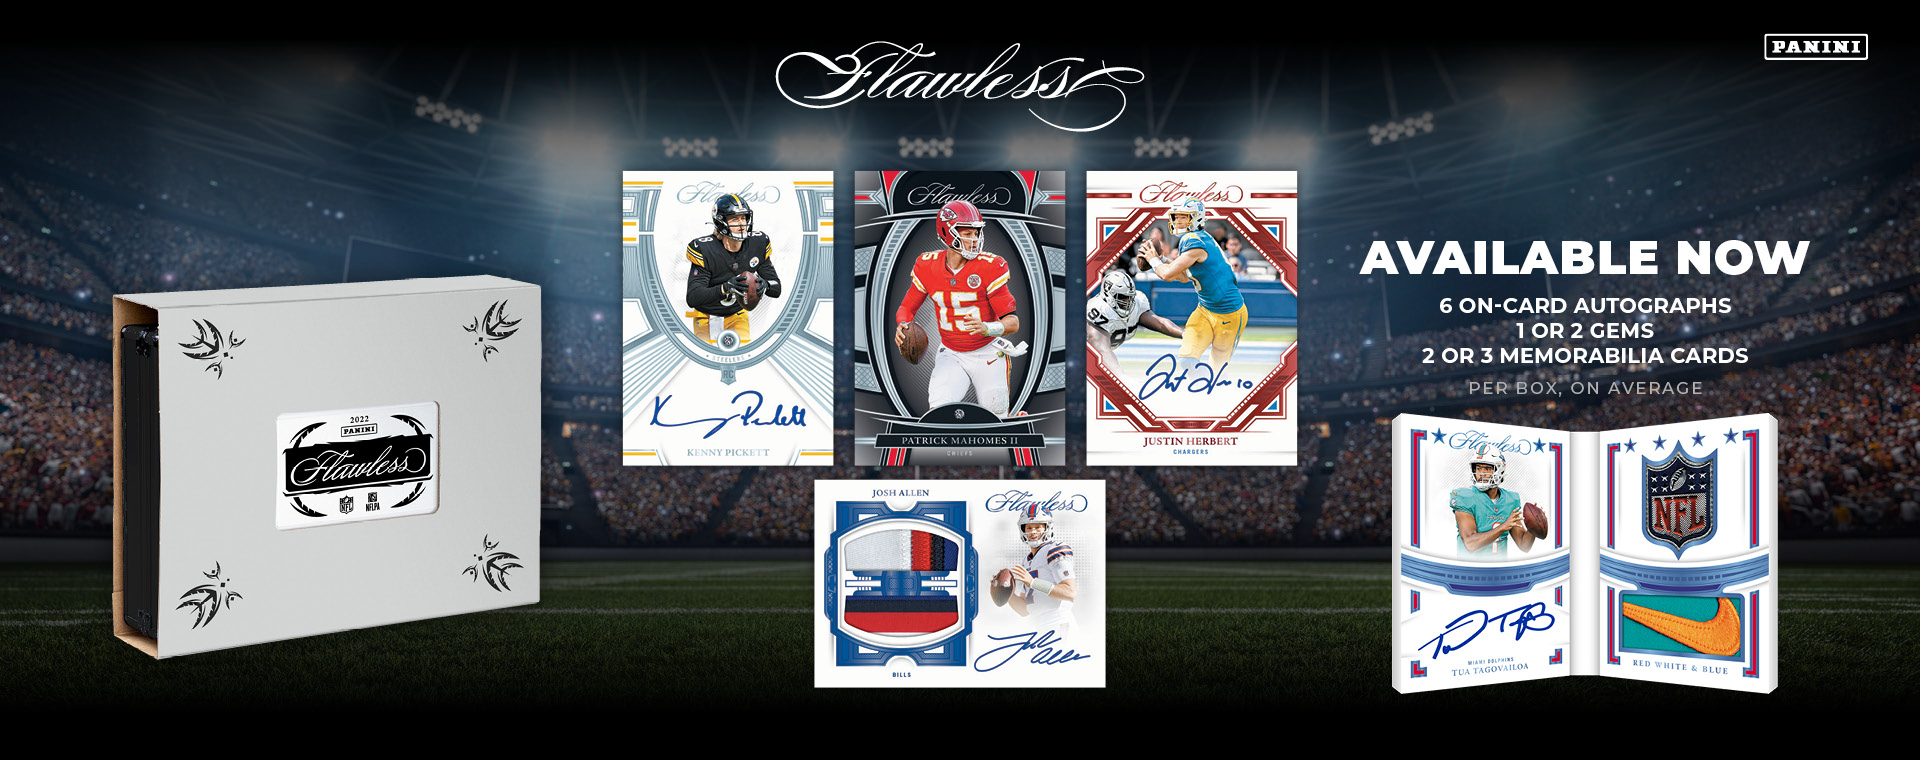 2022 Panini Flawless NFL Trading Card Box (Hobby) - Web - Available Now